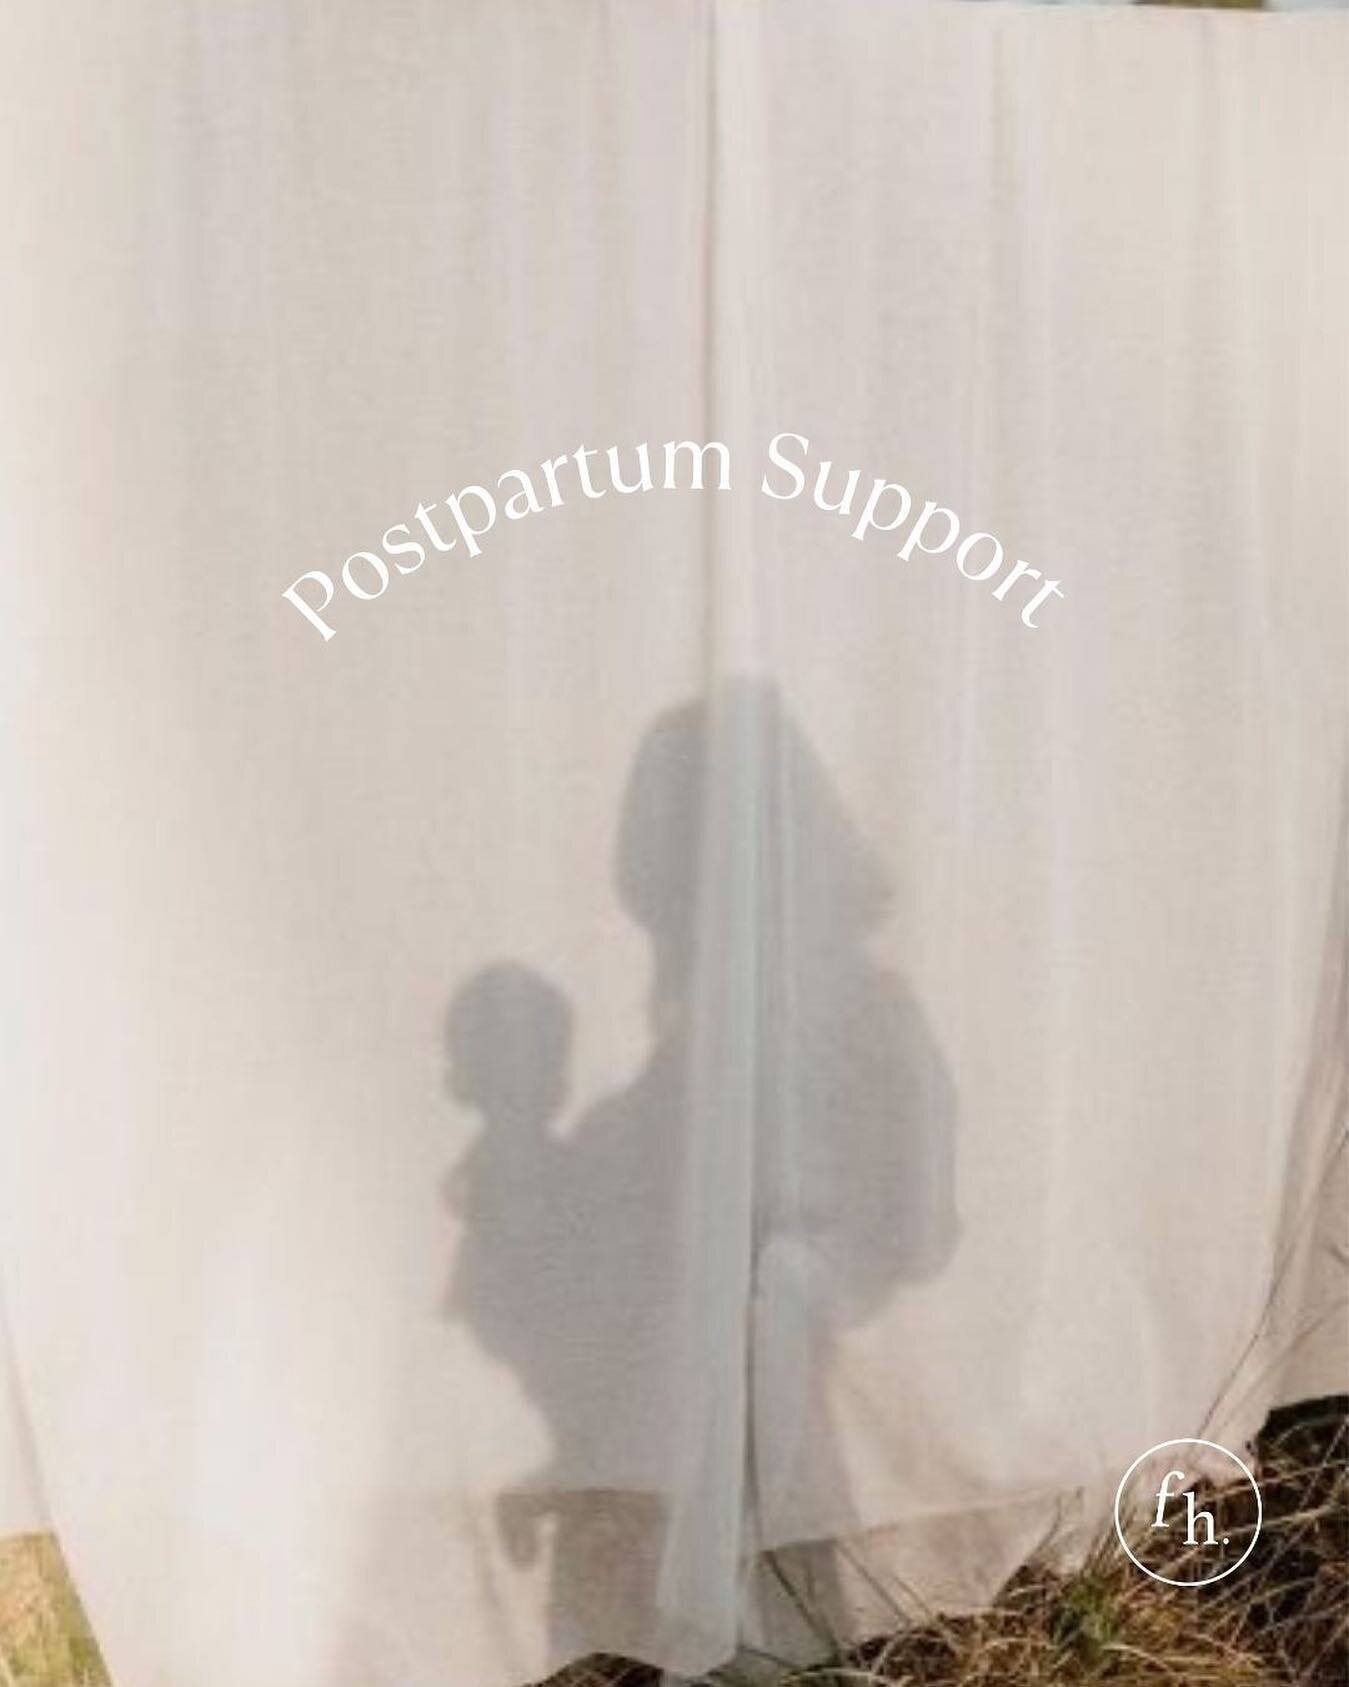 A consultation with a recently postpartum mother helped me see that I needed to create a special and simplified consultation offering for the postpartum mamas. 

I know too from my own experience that even finding the time to shower can some days fee